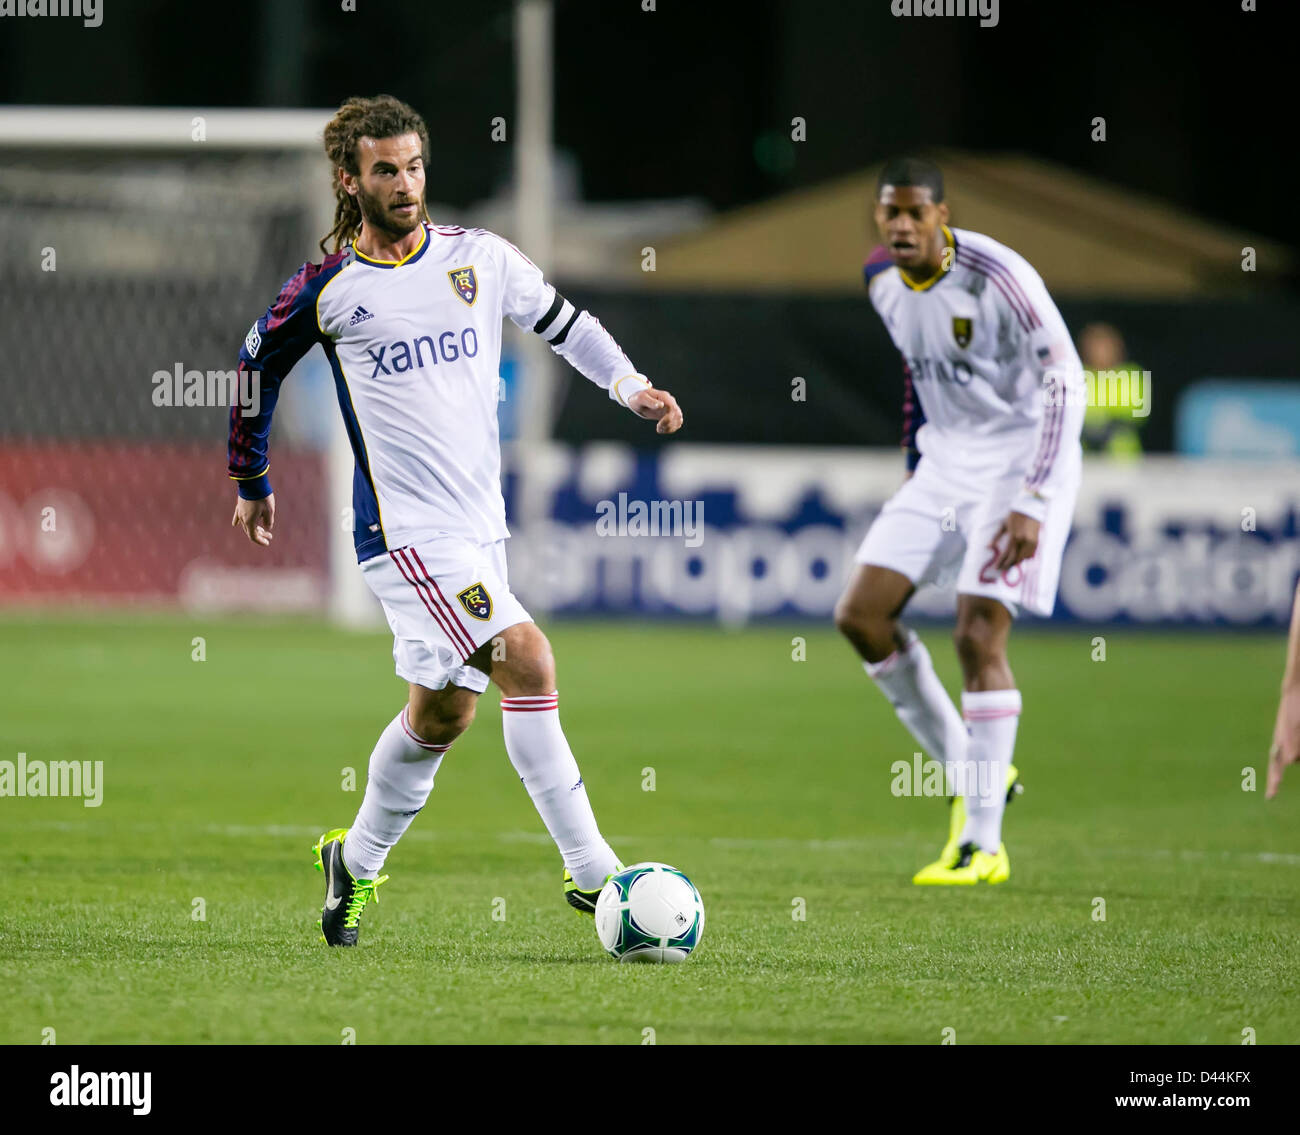 March 3, 2013: Real Salt Lake midfielder Kyle Beckerman (5) in action during the MLS game between the Real Salt Lake and the San Jose Earthquakes at Buck Shaw Stadium in Santa Clara CA. Real Salt Lake defeated San Jose 2-0. Stock Photo